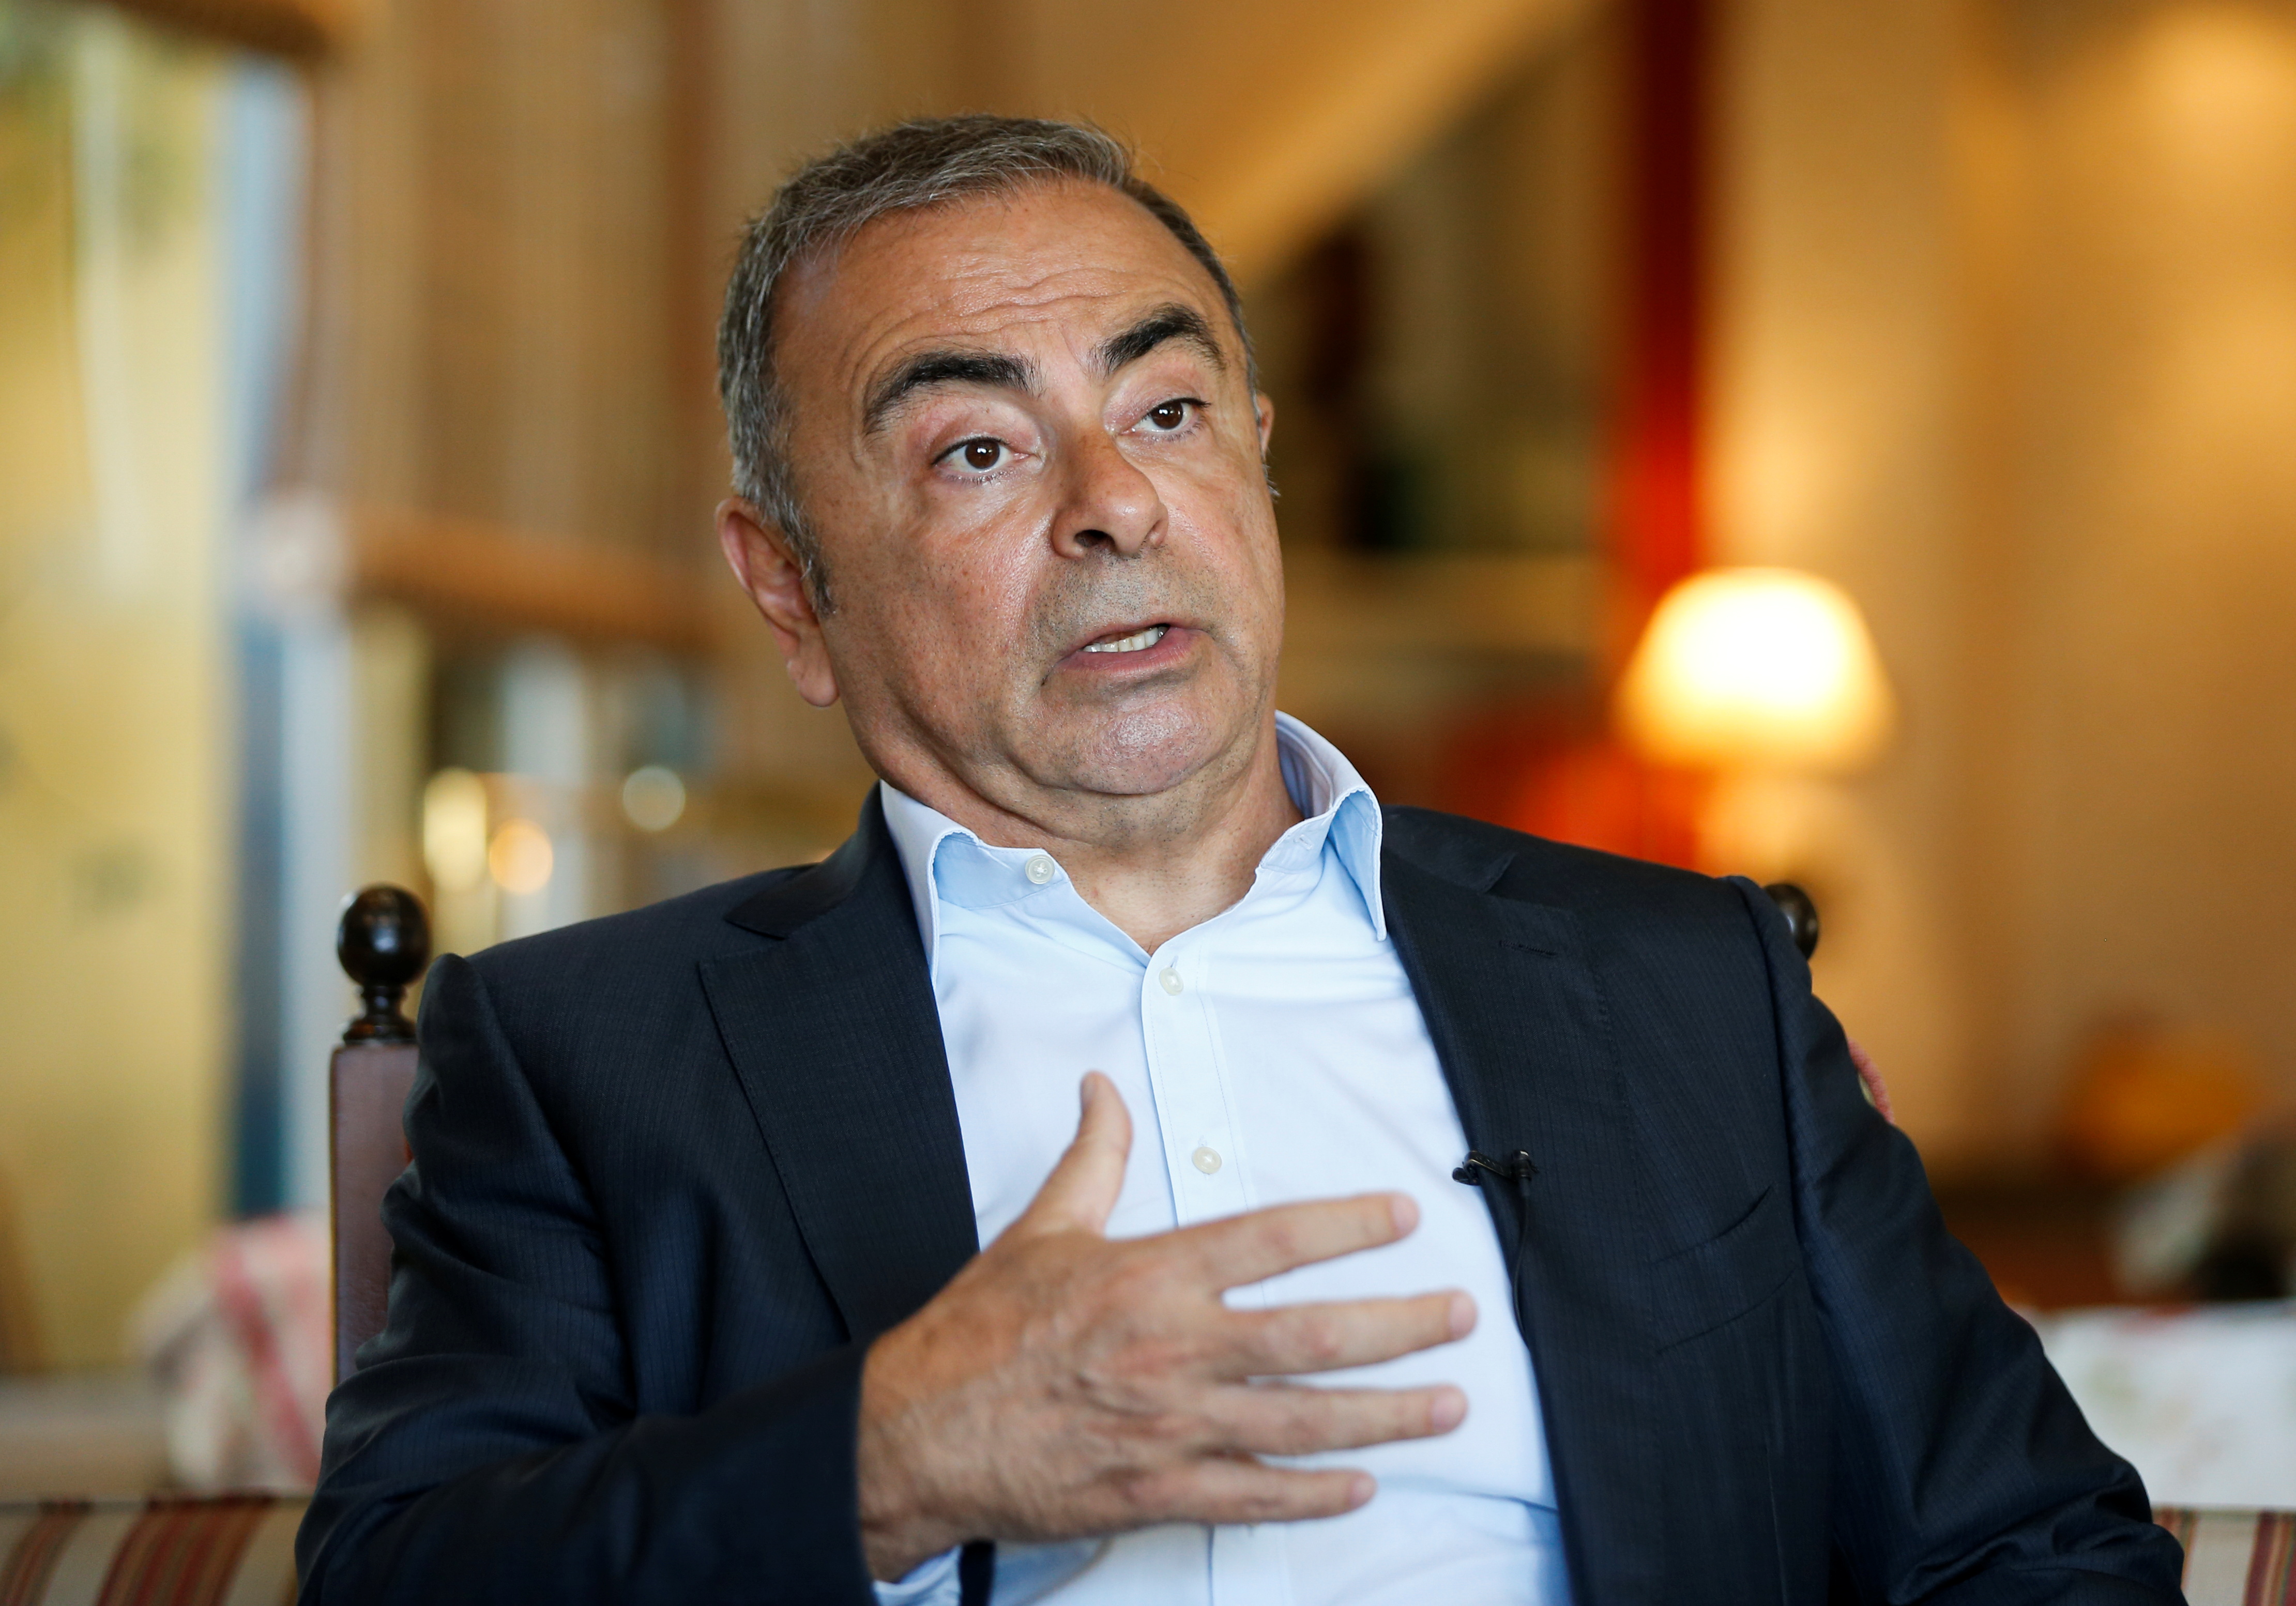 Fugitive former car executive Carlos Ghosn, gestures as he talks during an interview with Reuters in Beirut